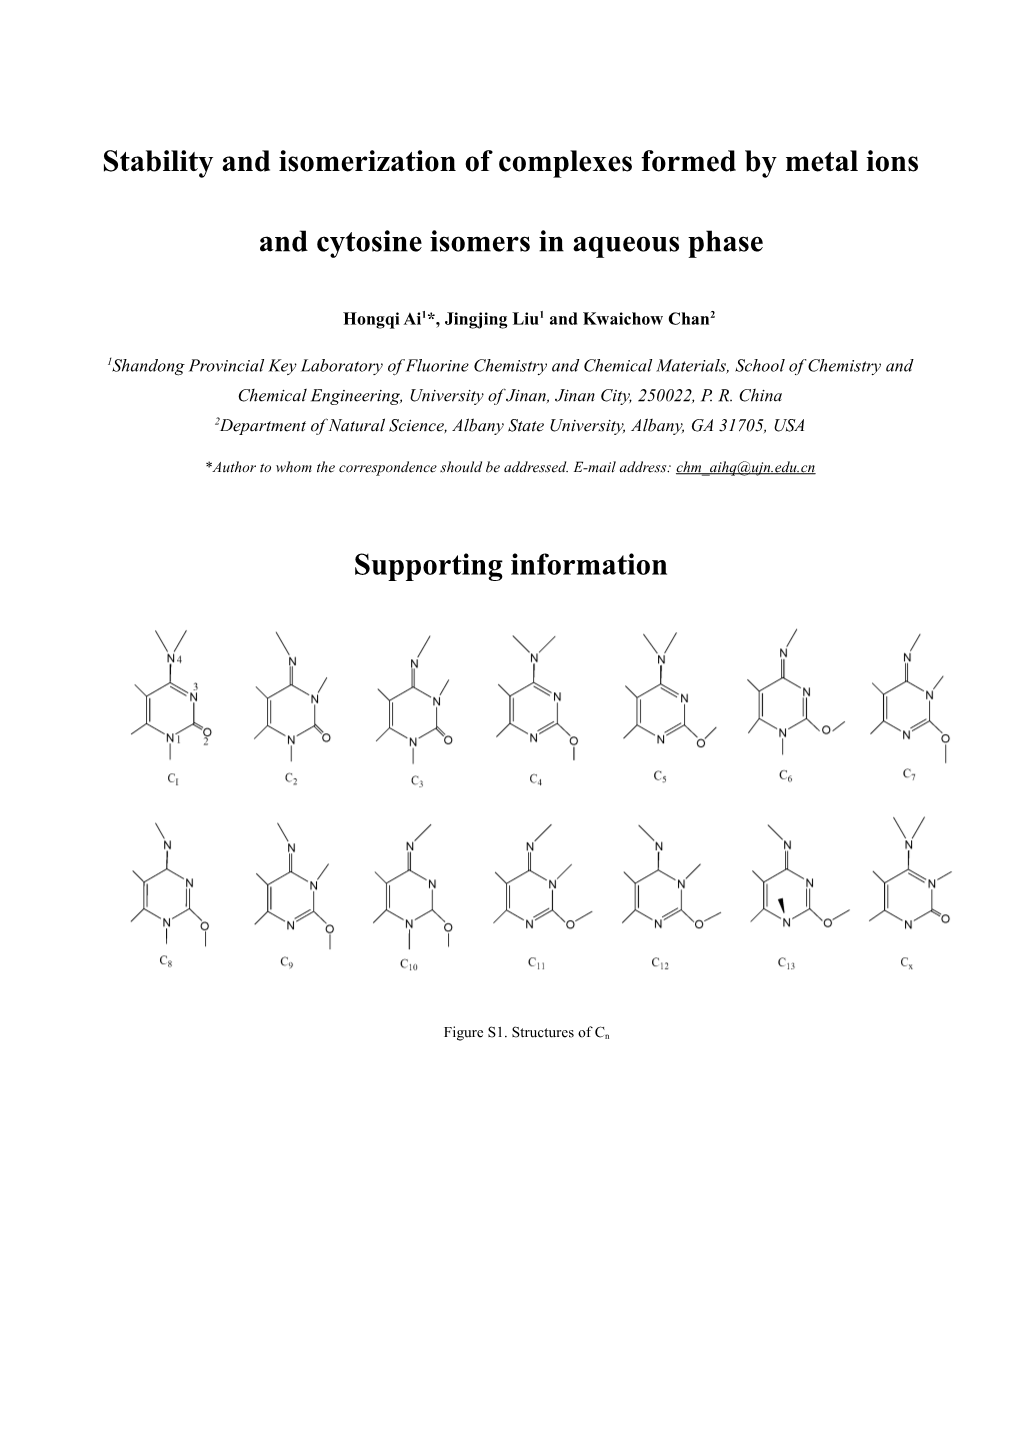 Stability of Complexes Formed by Metal Ions (Na+ K+ Ca2+ Mg2+) and Cytosine Isomers